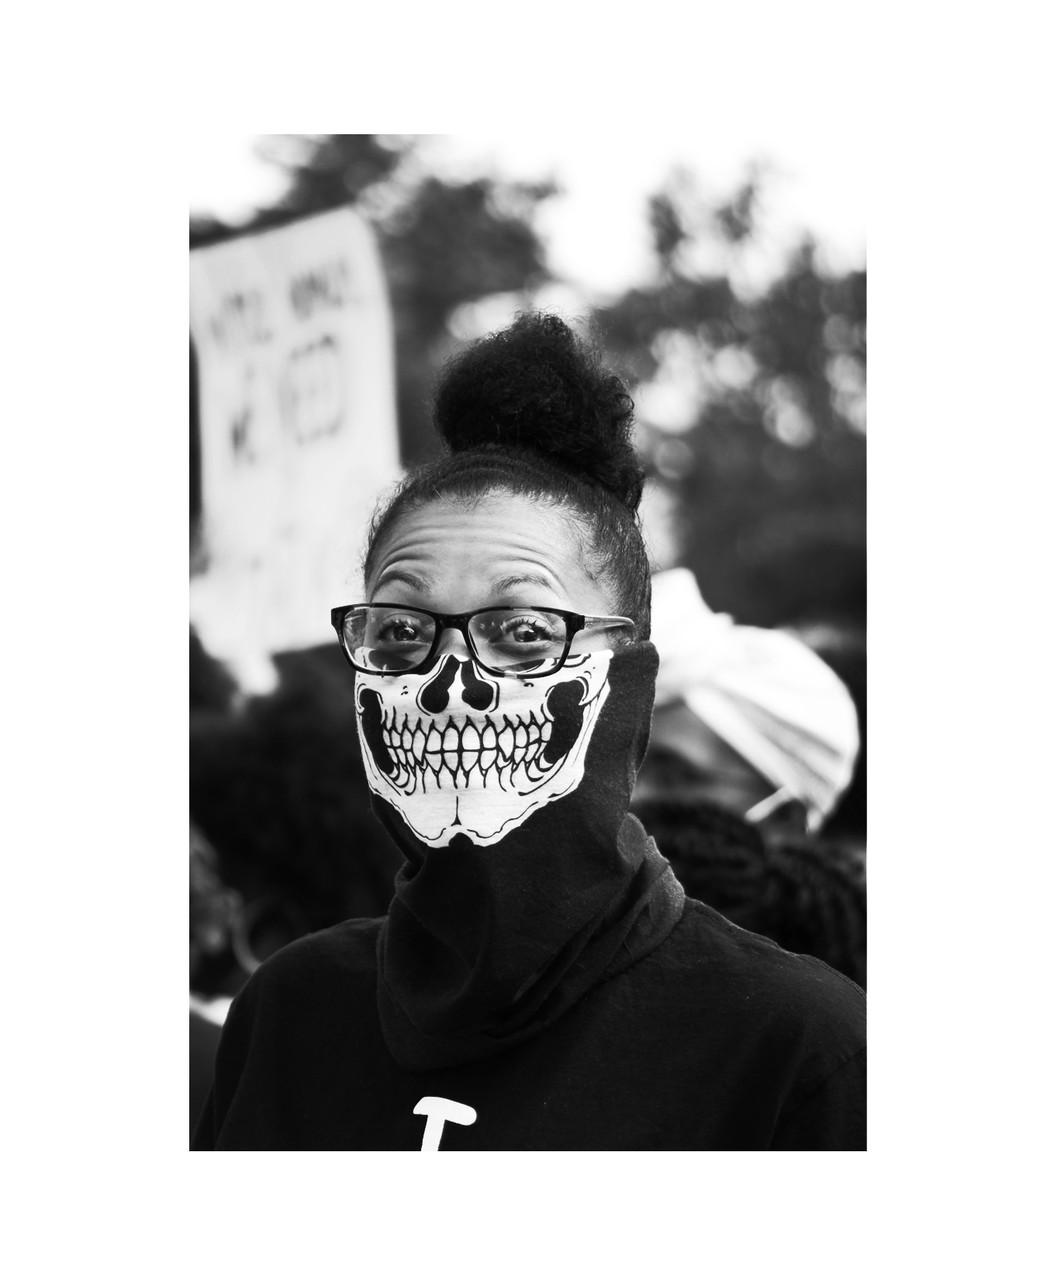 black and white photograph of a woman wearing a skulk mask that covers the bottom half of her face during a march